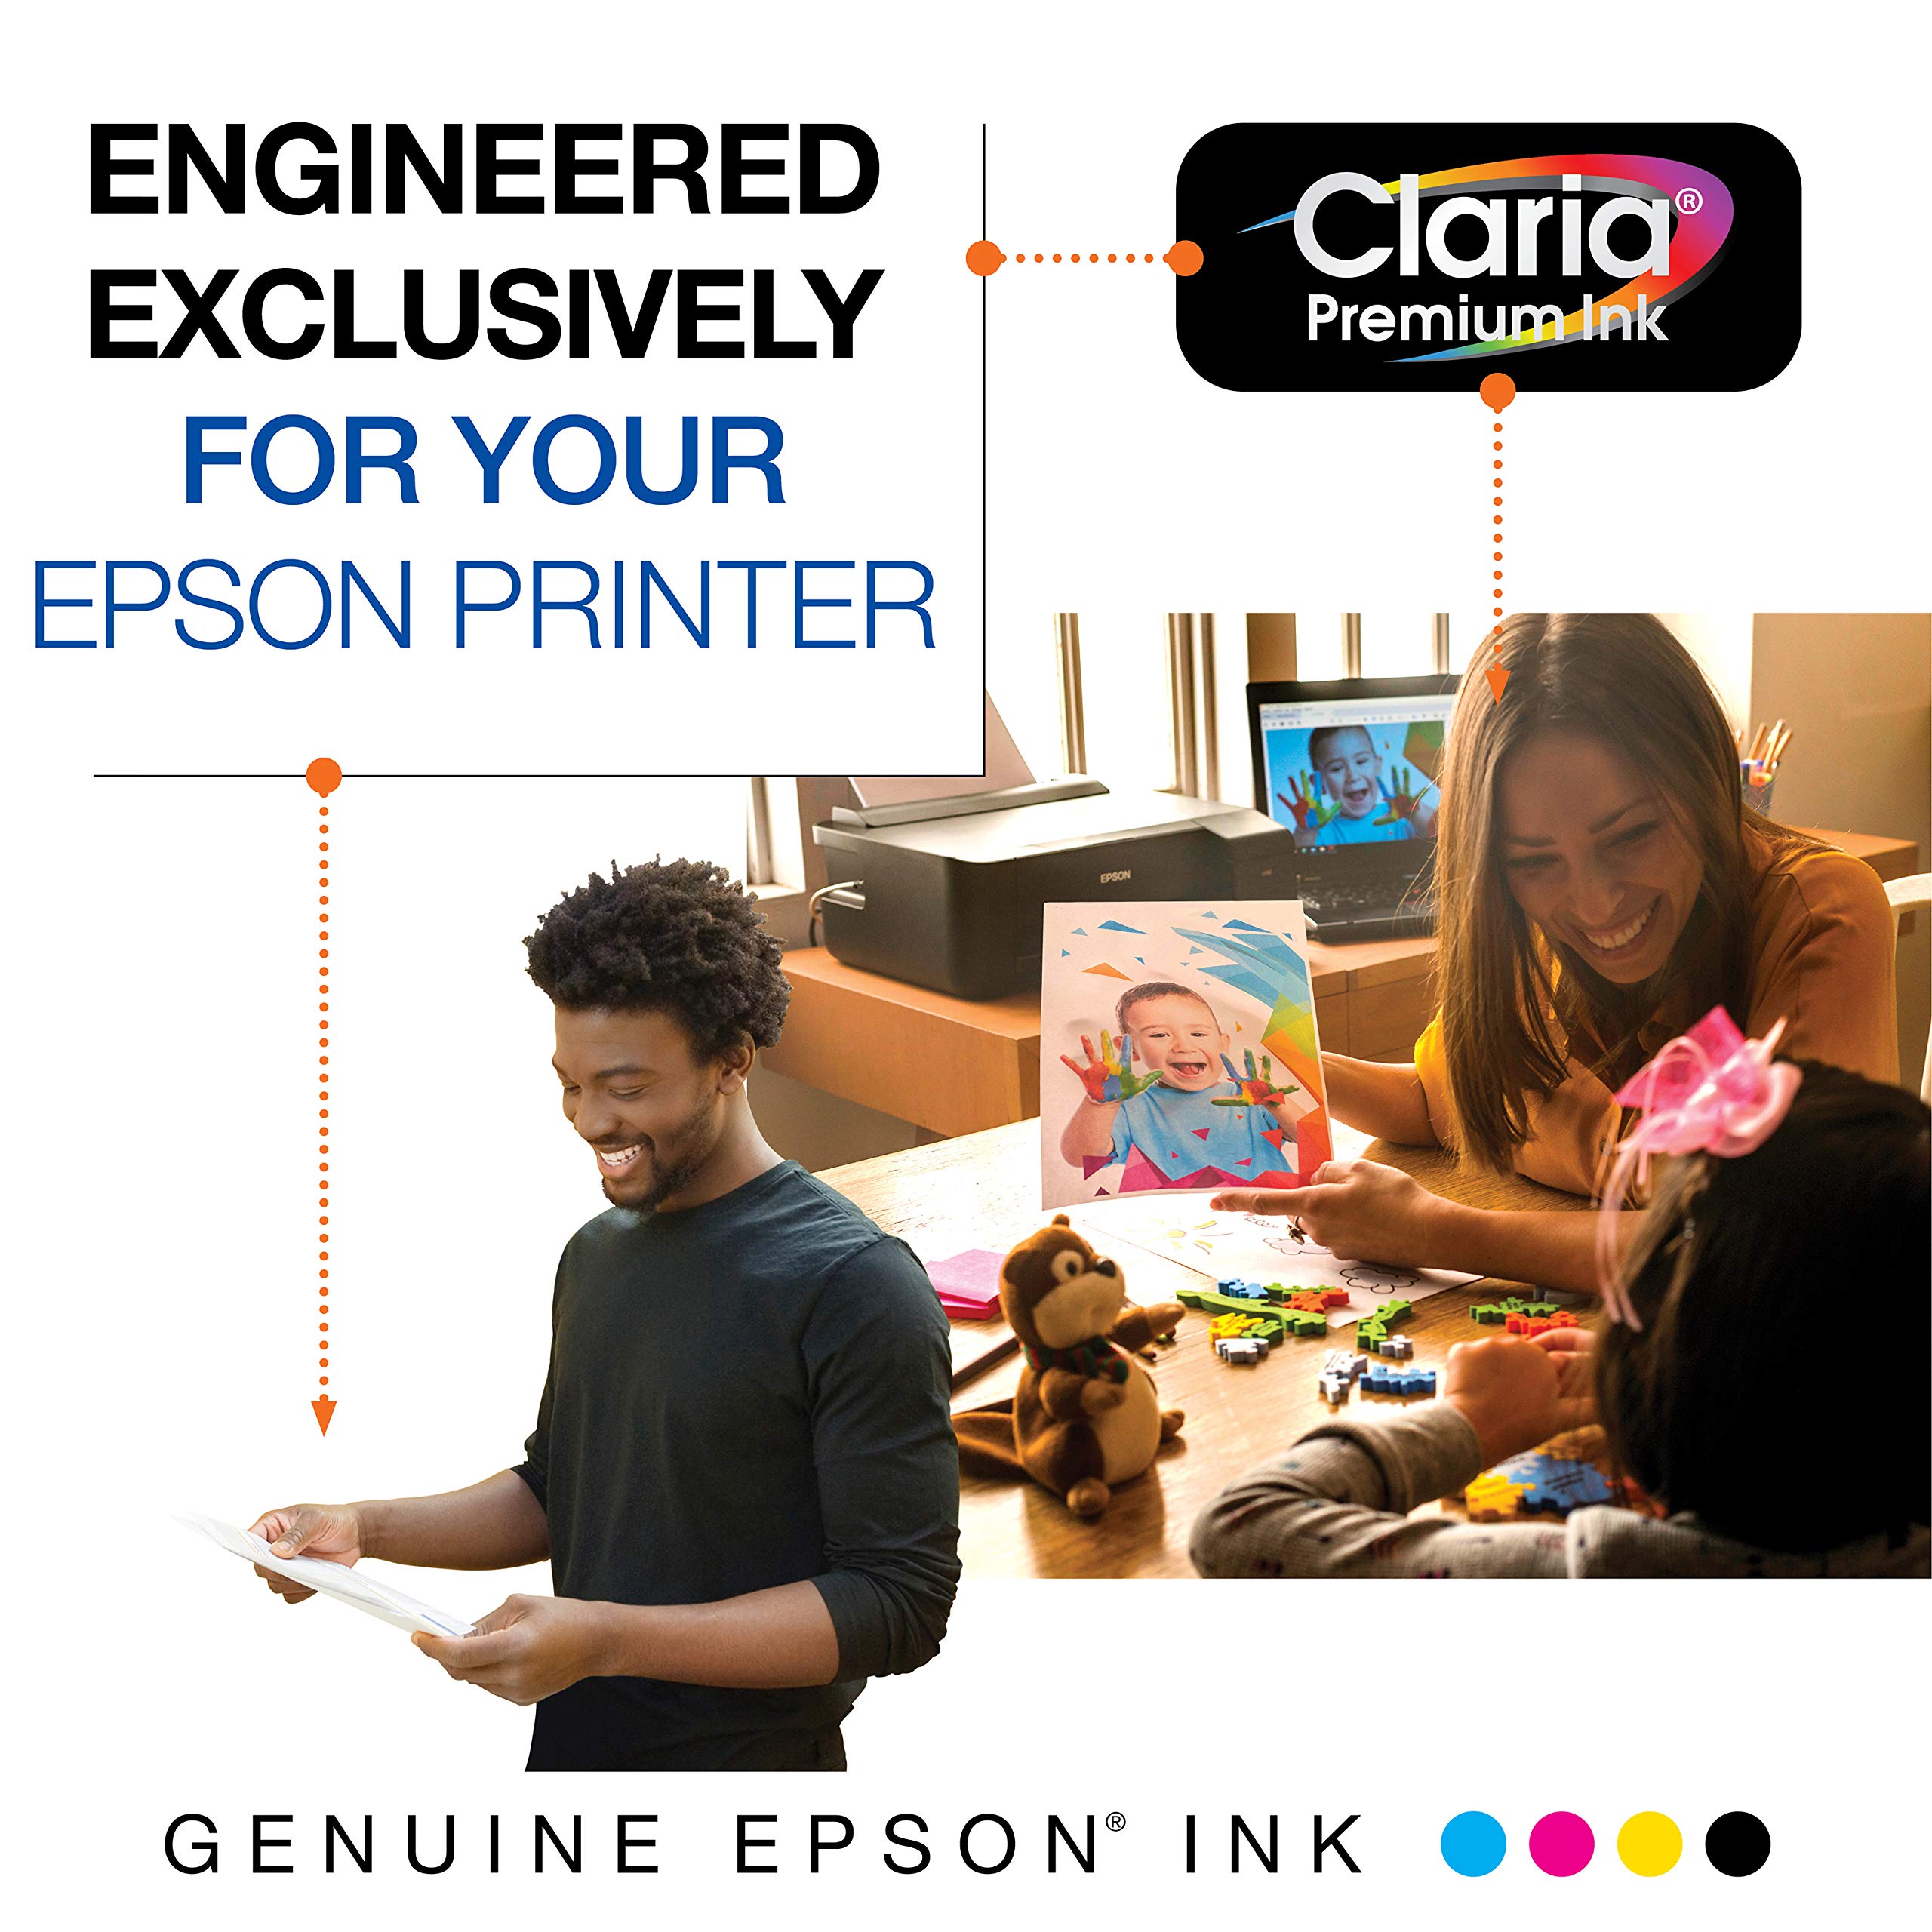 EPSON T302 Claria Premium -Ink High-capacity Black and Standard-capacity Photo Black and Color-Cartridge Combo Pack (T302XL-BCS) for select Epson Expression Premium Printers